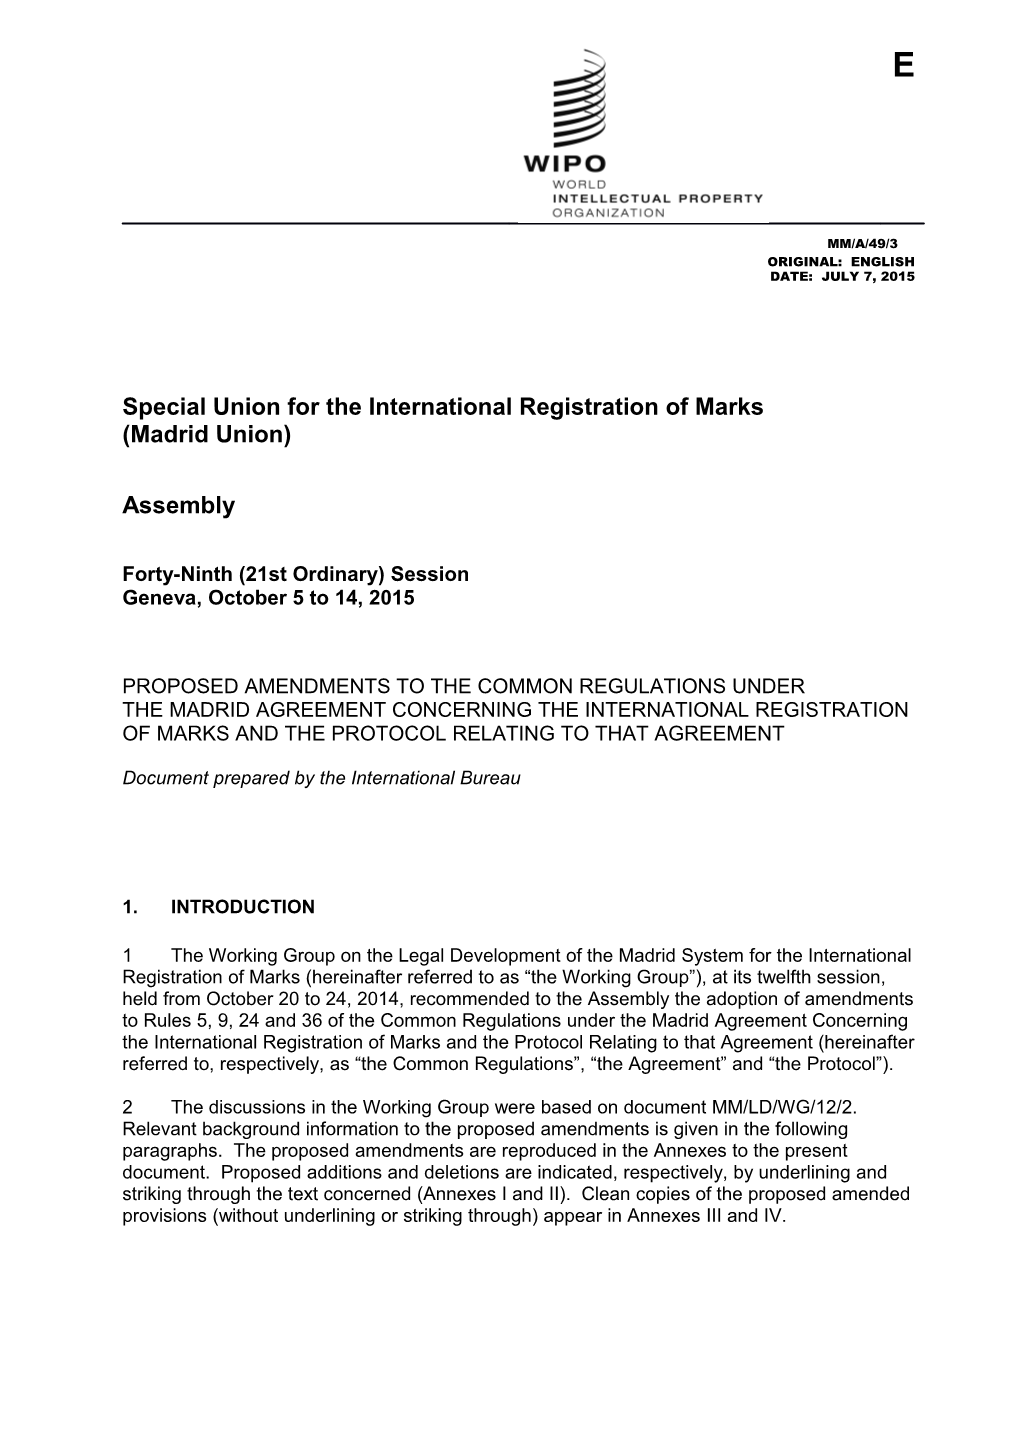 Special Union for the International Registration of Marks